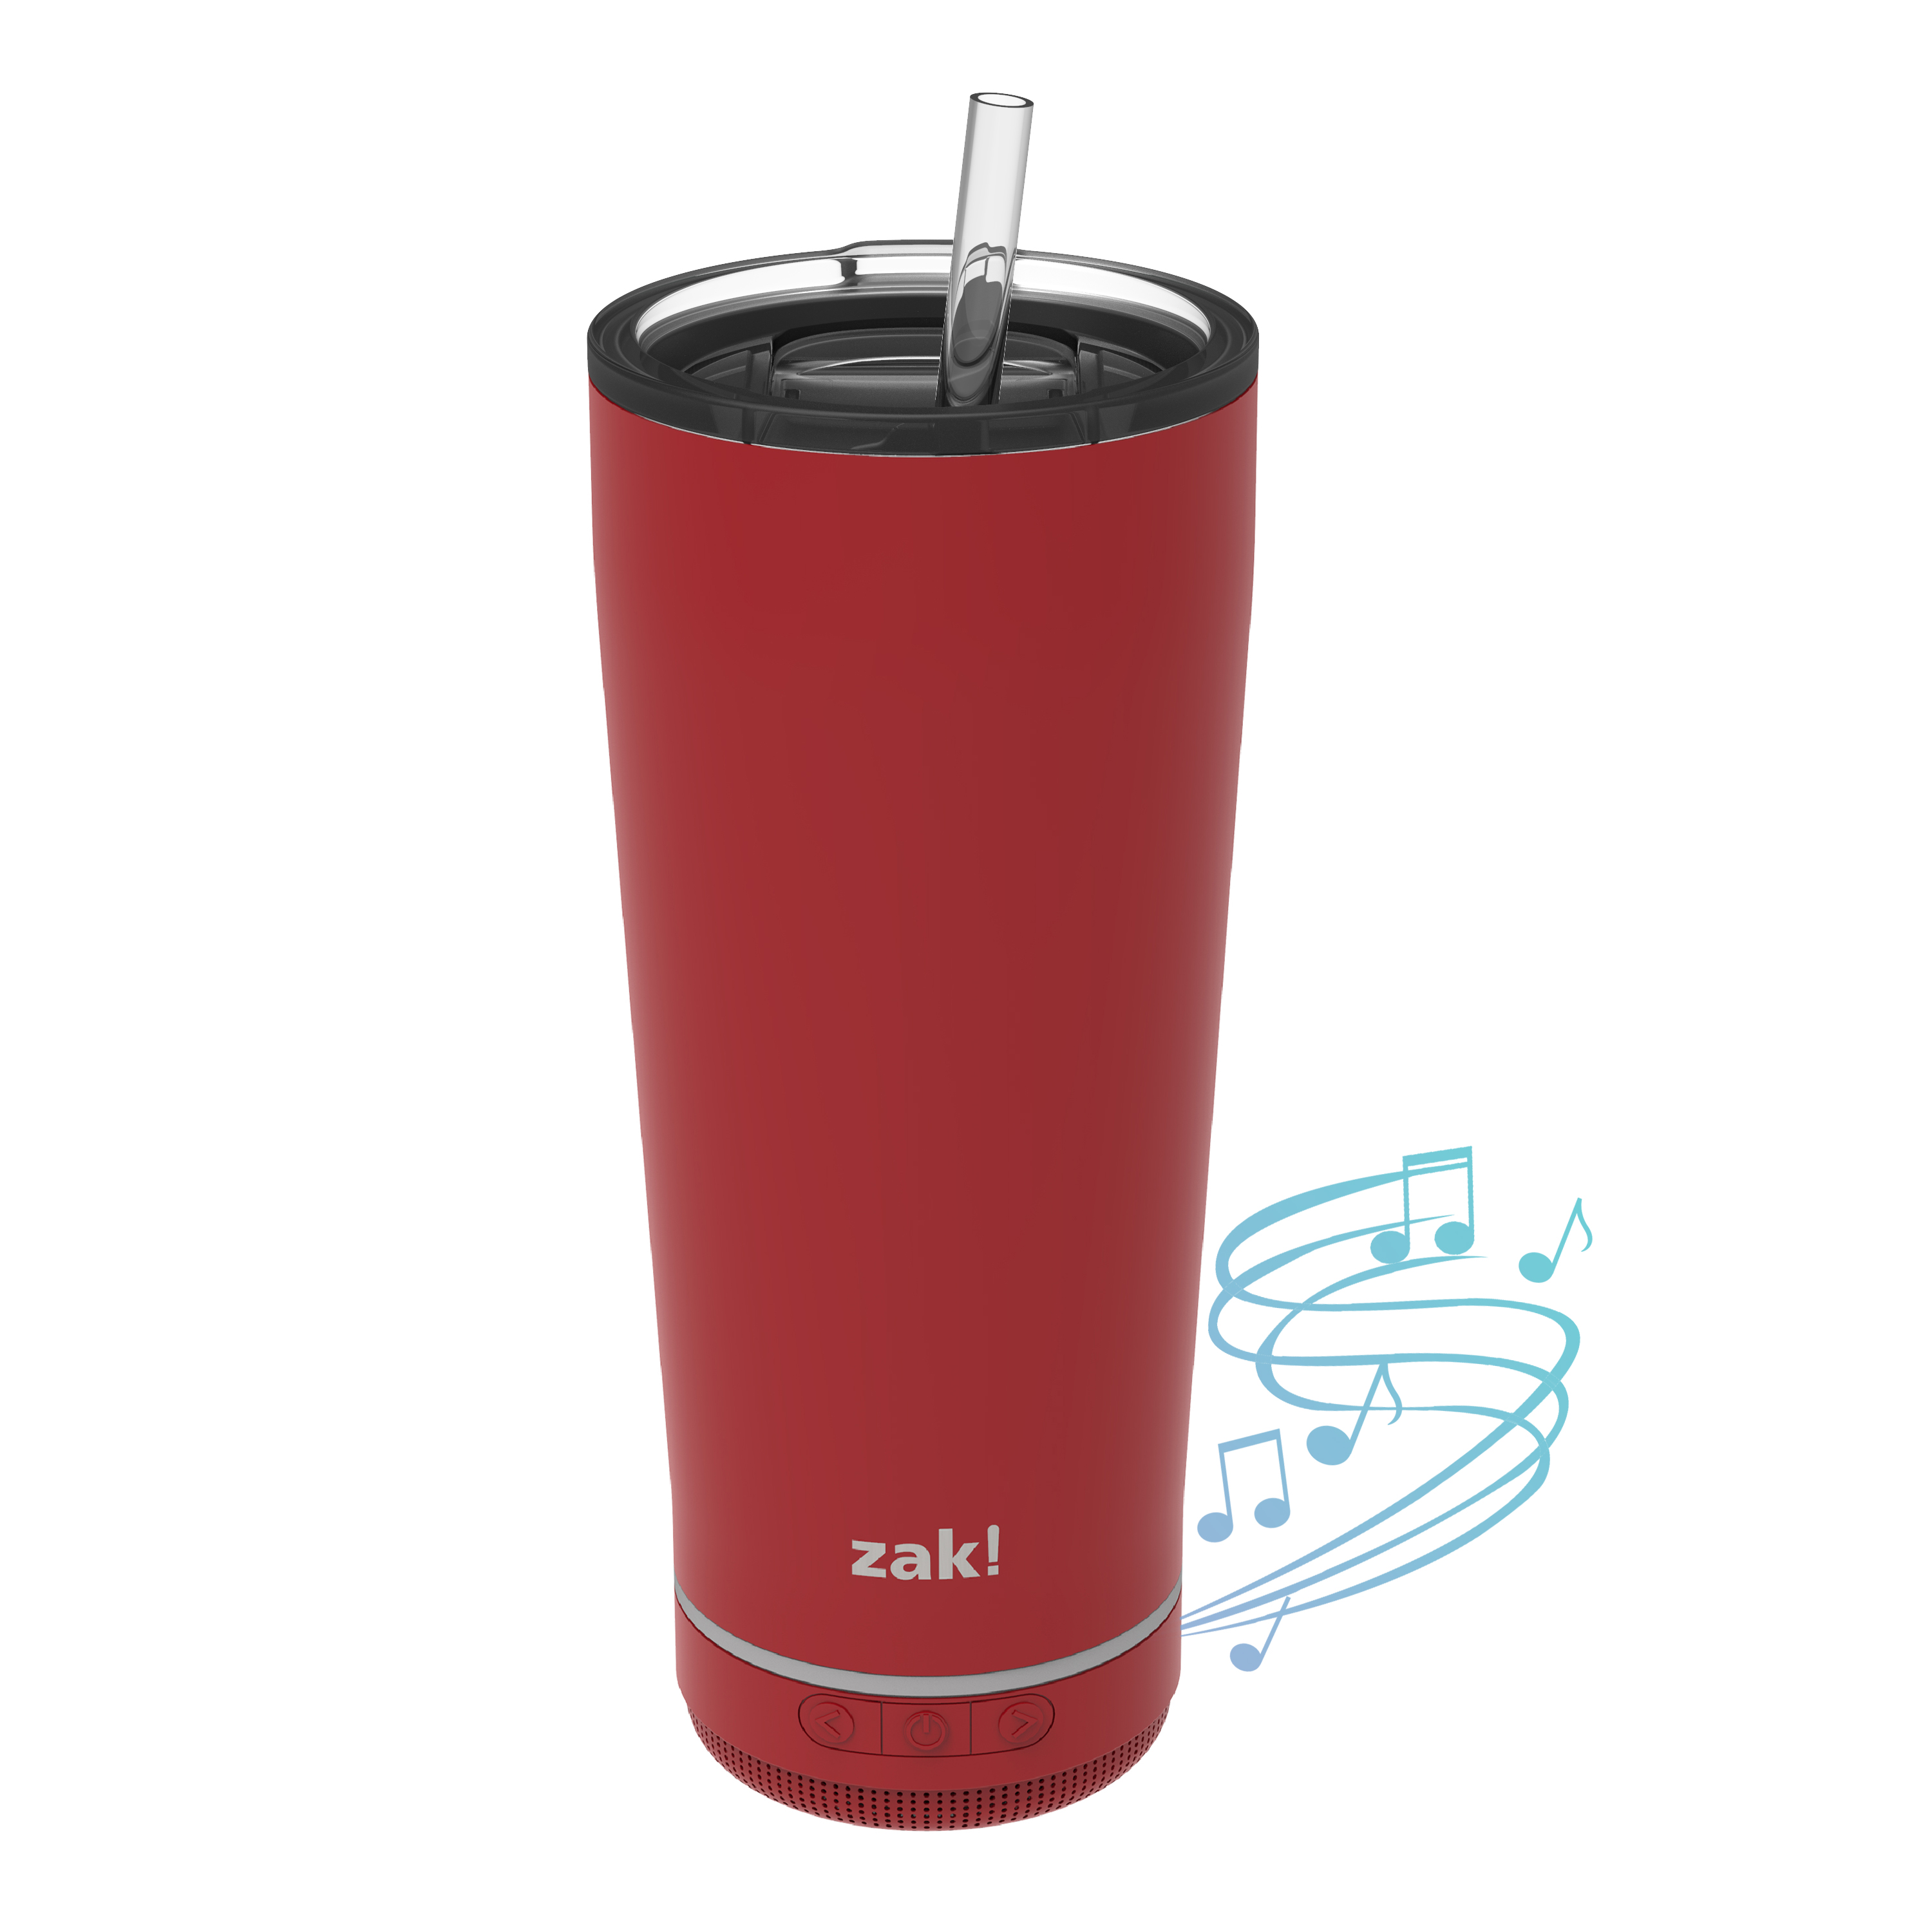 Zak Play 18 ounce Stainless Steel Tumbler with Bluetooth Speaker, Red slideshow image 1